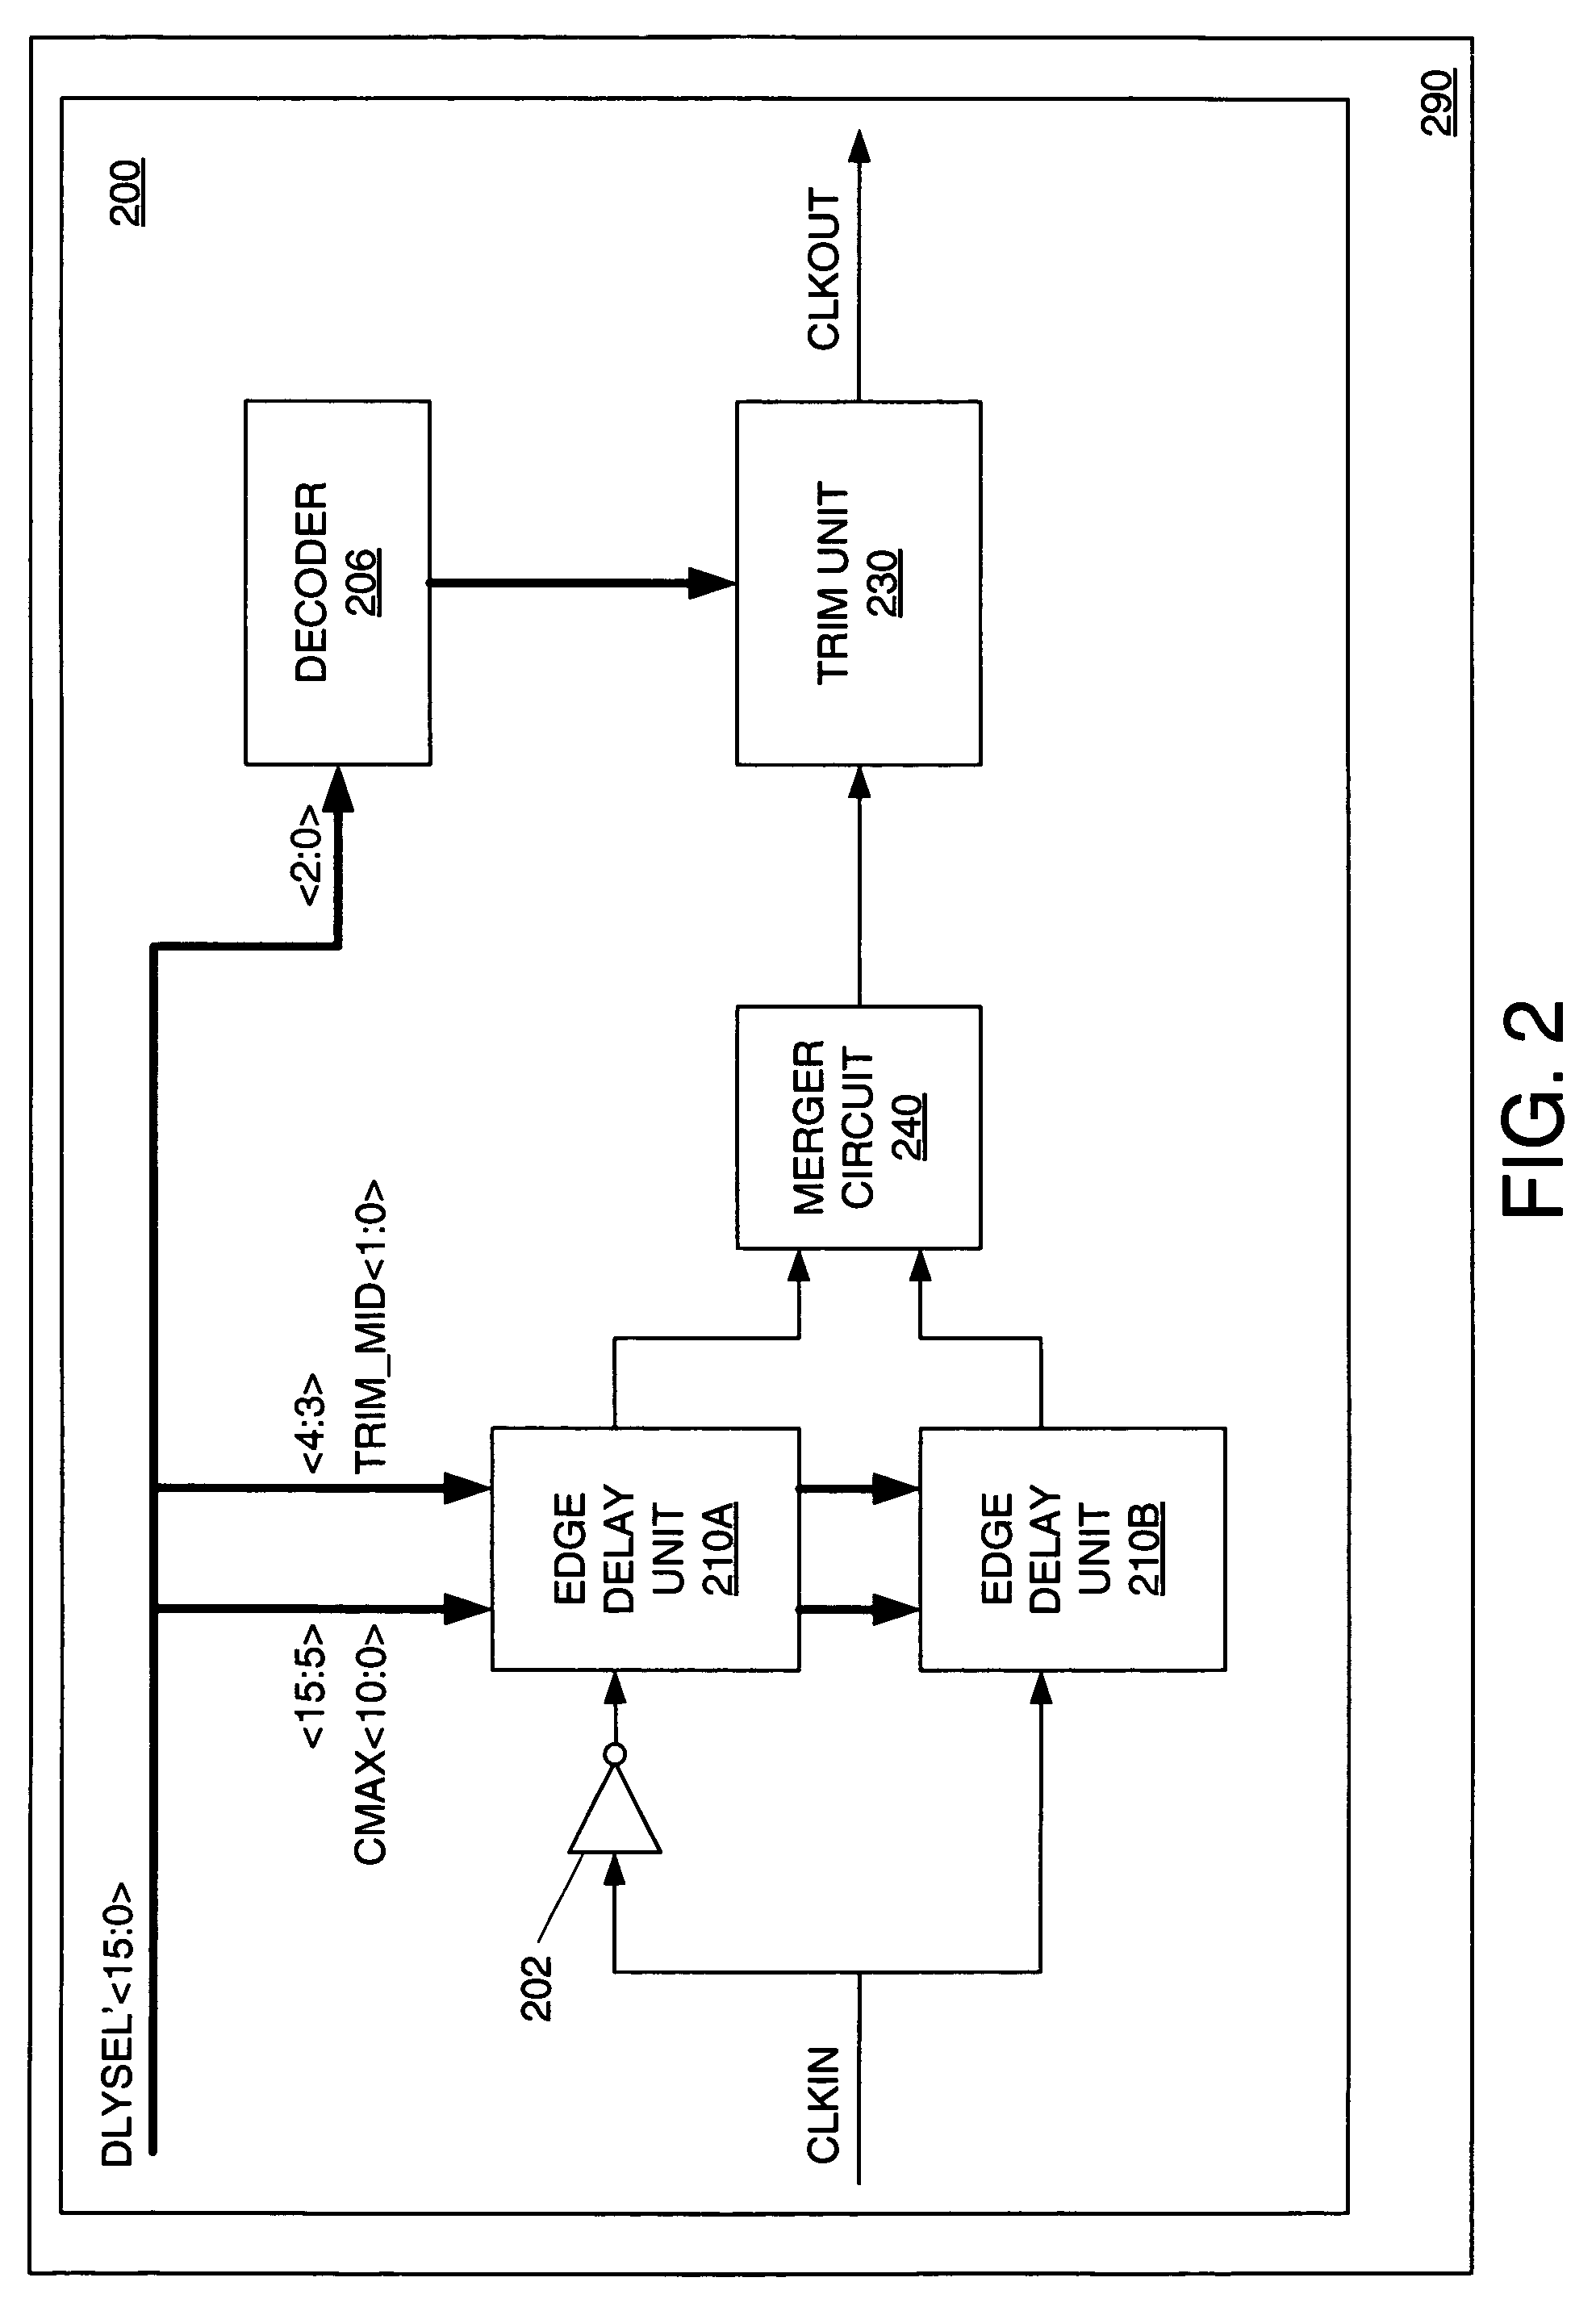 Counter-controlled delay line